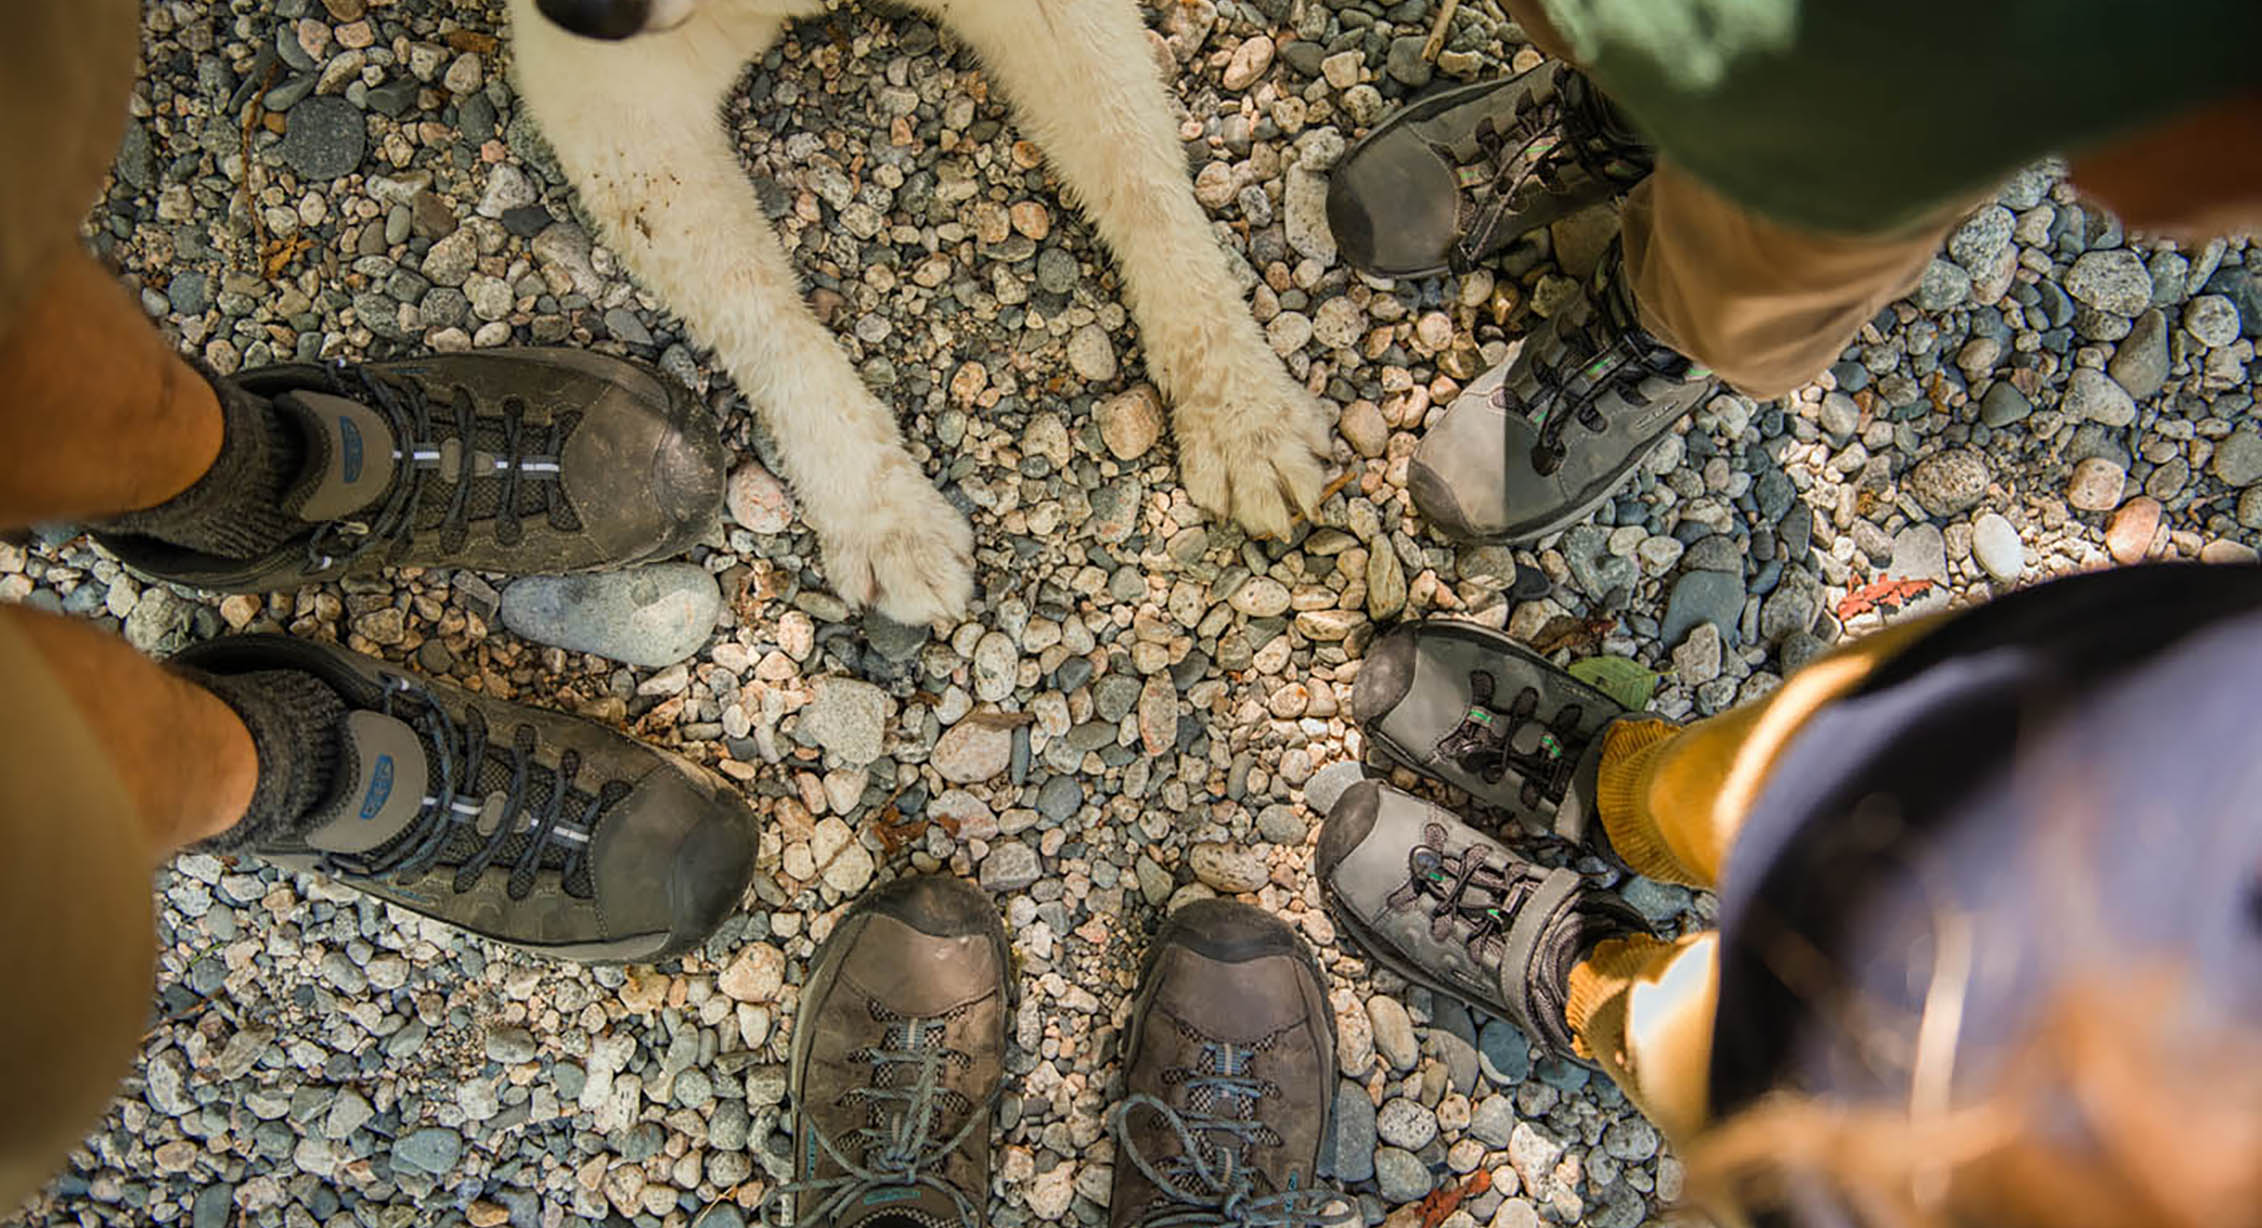 A group shot of paws and hiking shoes